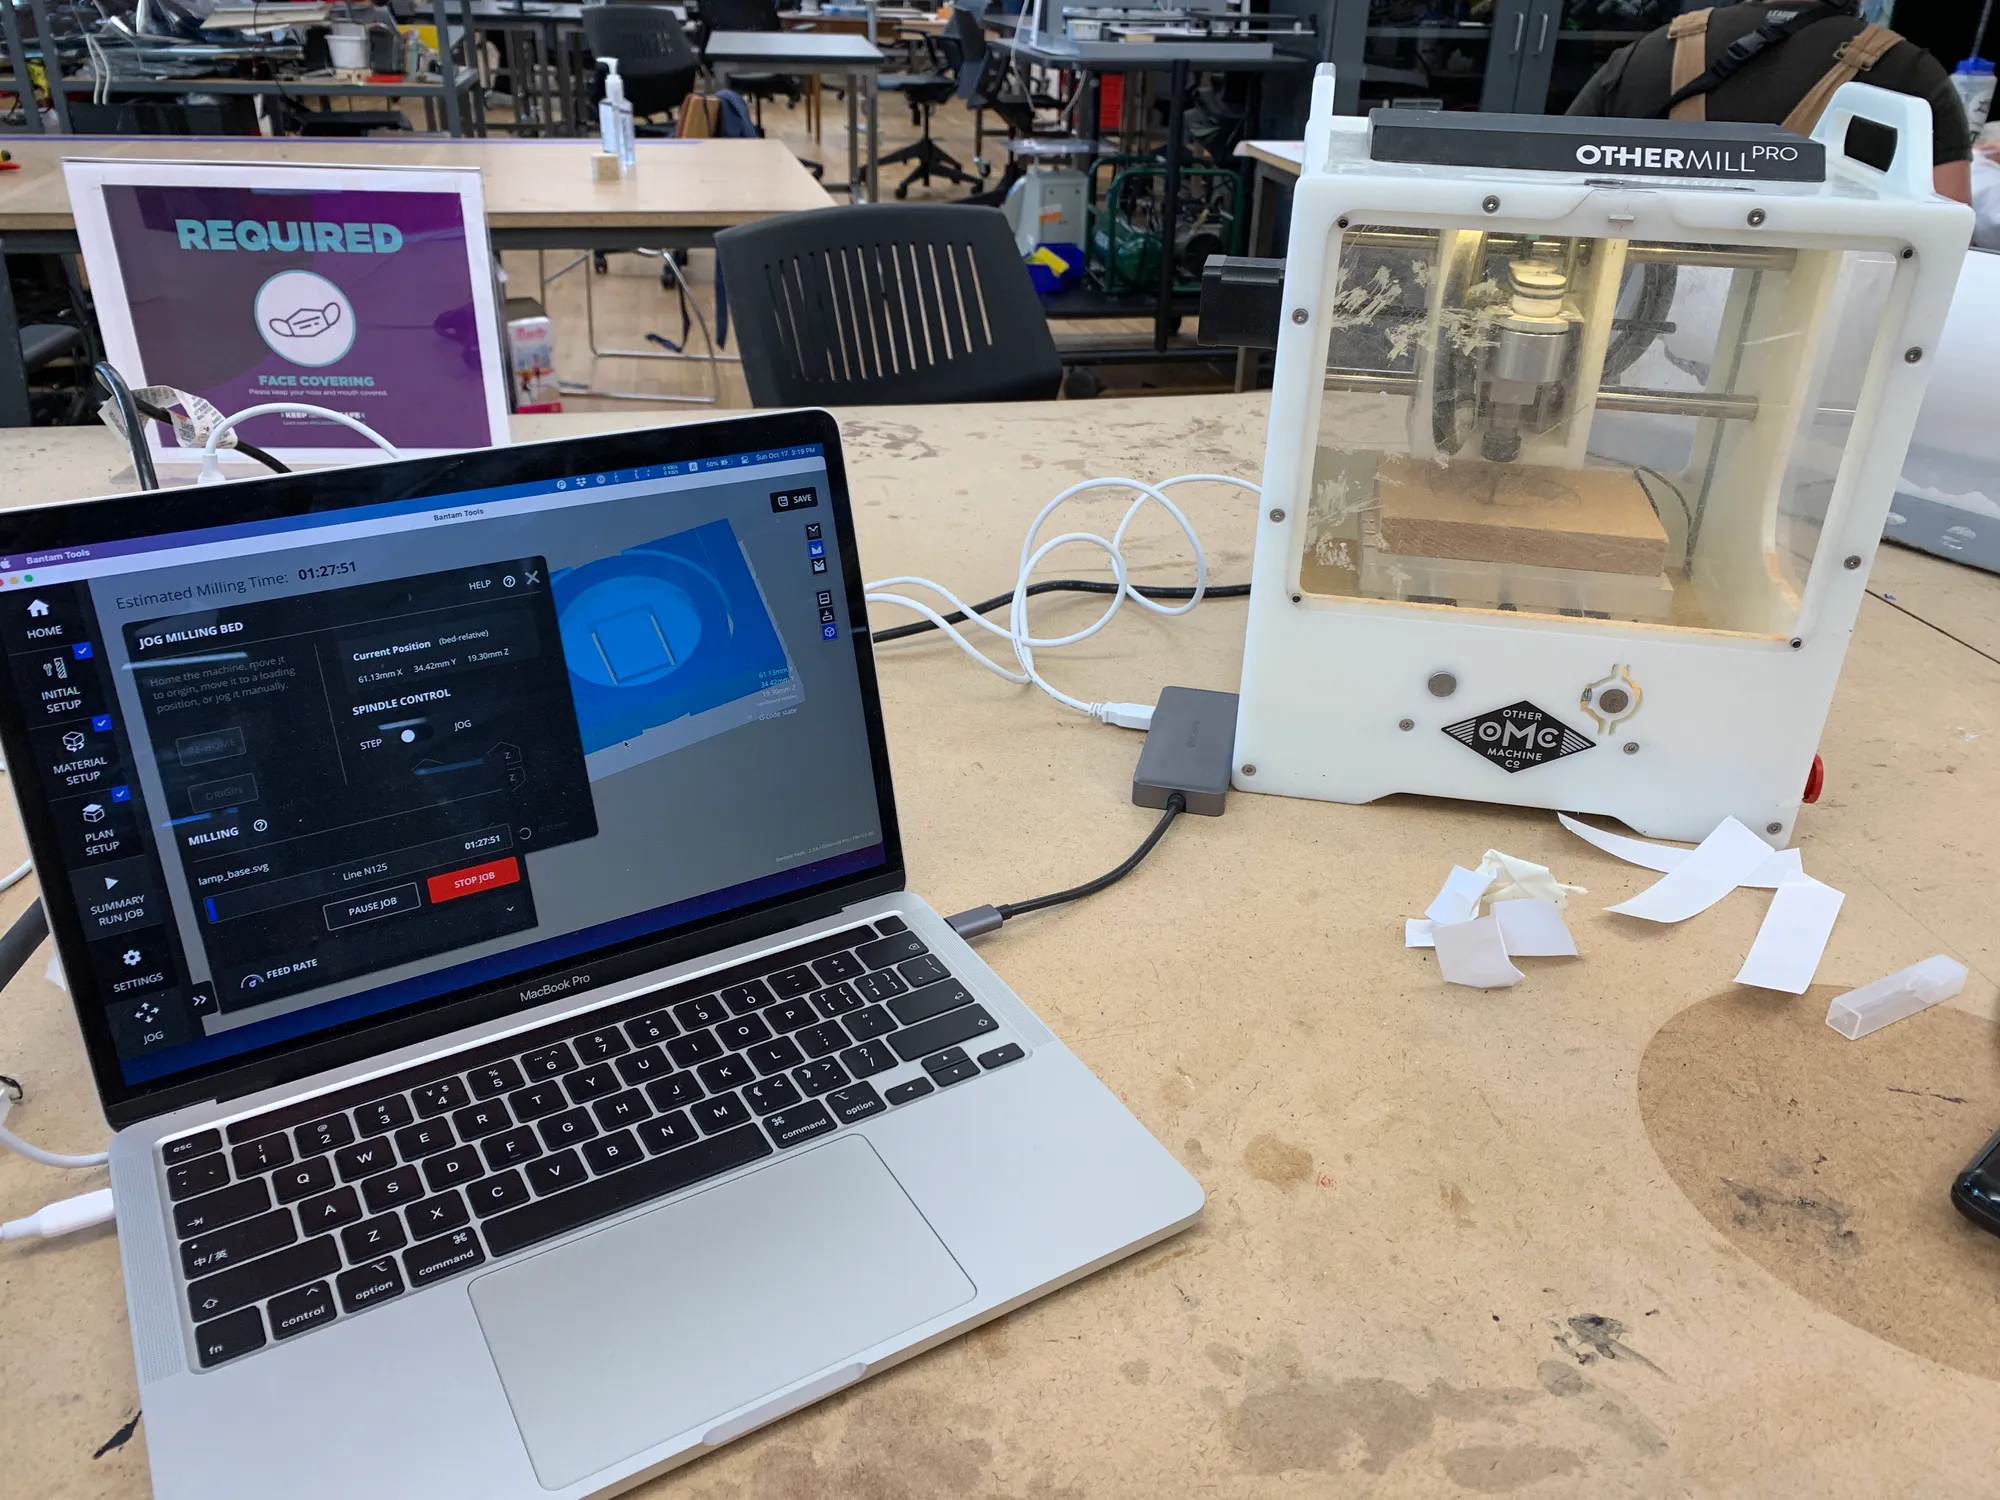 othermill cnc machine milling a piece of oak, computer next to it showing its progress